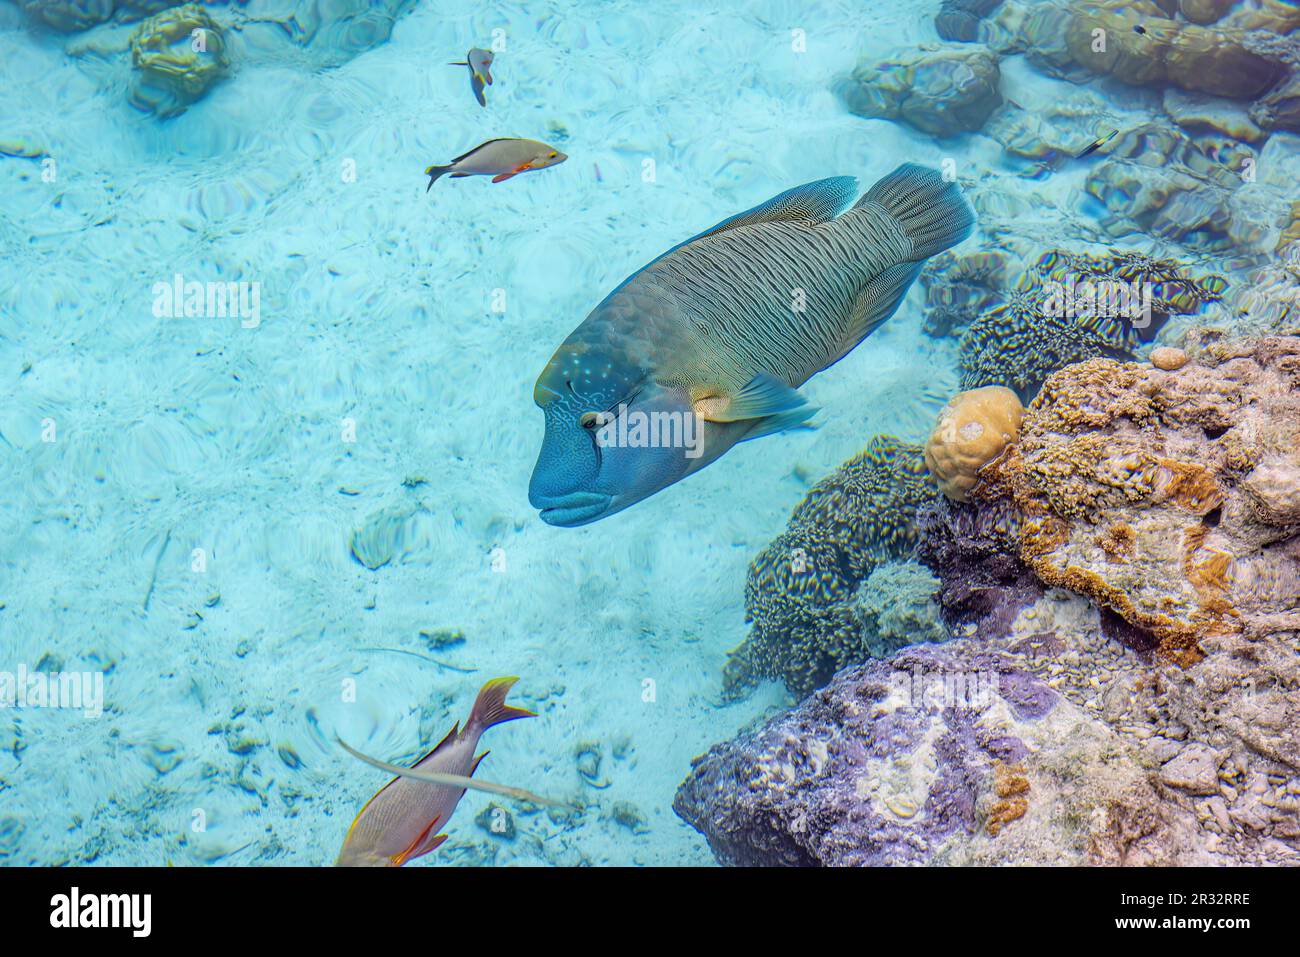 Napolean fish, the big resident of the St Regis Bora Bora lagoon.  It expertly swims sideway in swallow water. Stock Photo